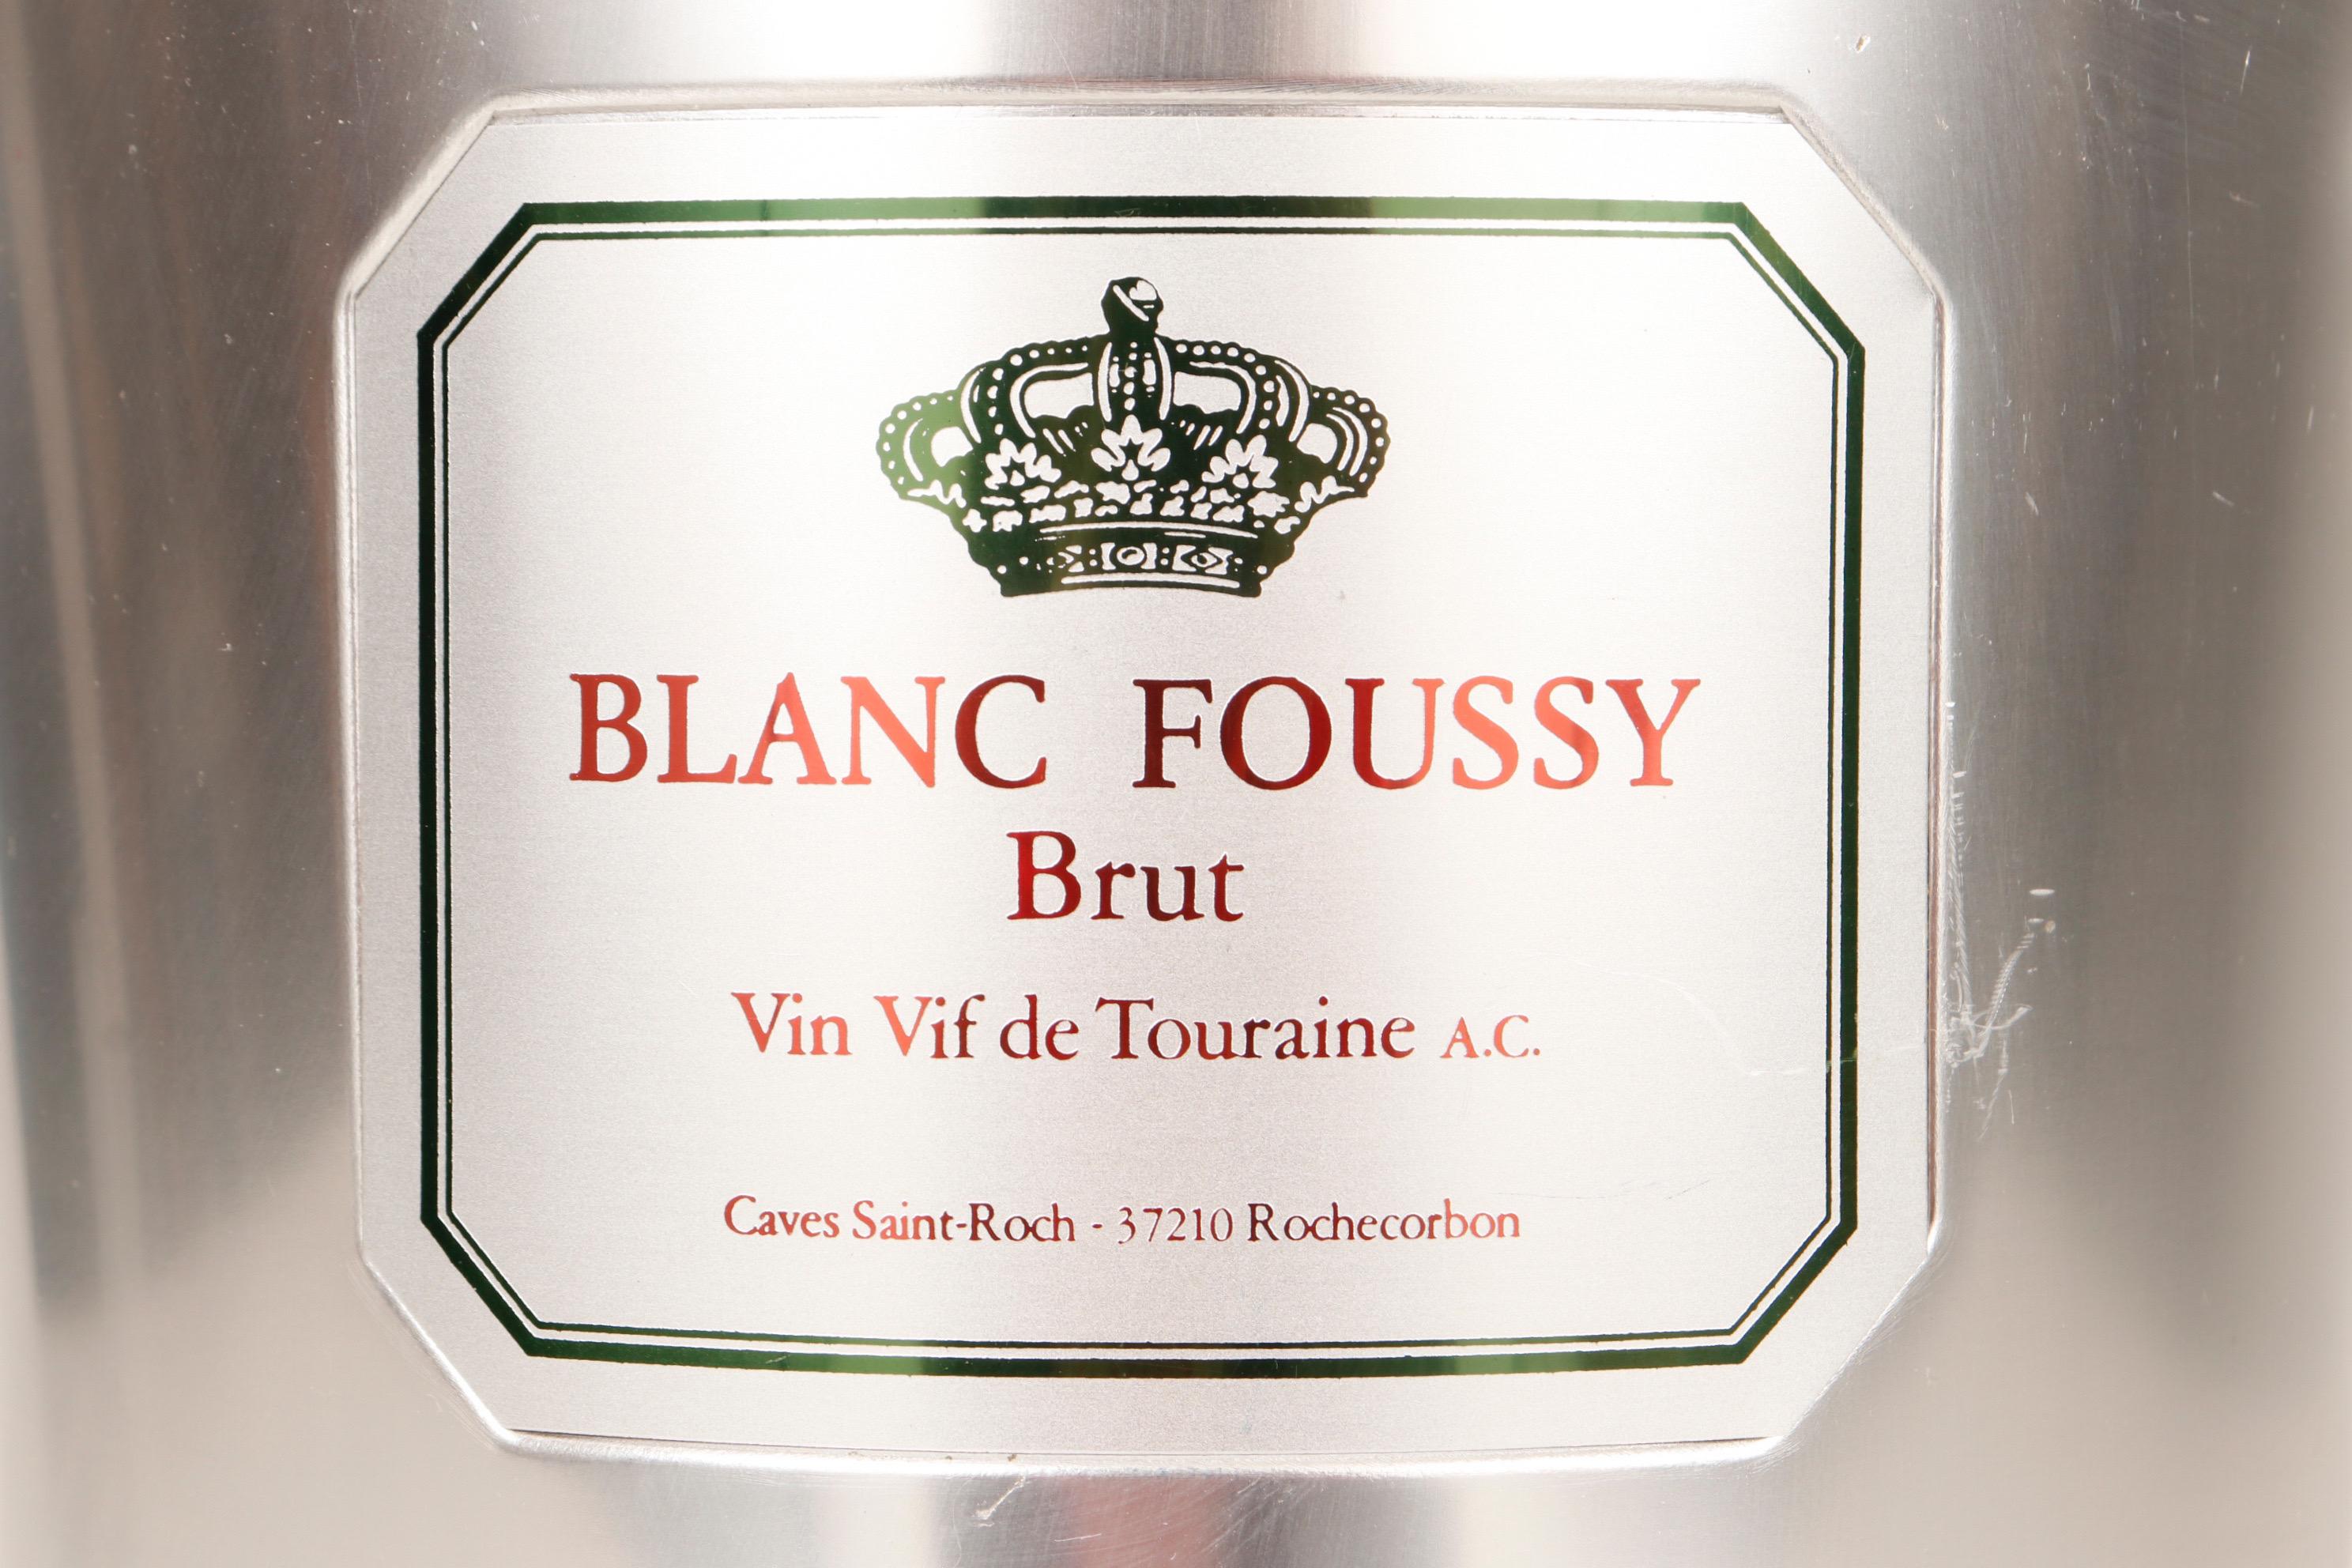 A Blanc Foussy Brut Champagne bucket. Made of aluminum, the bucket has a round pull handle at each side. In front is a plaque which reads “Blanc Foussy Brut Vin Vif de Touraine A.C. Caves Saint-Roch - 37210 Rochecorbon”.
